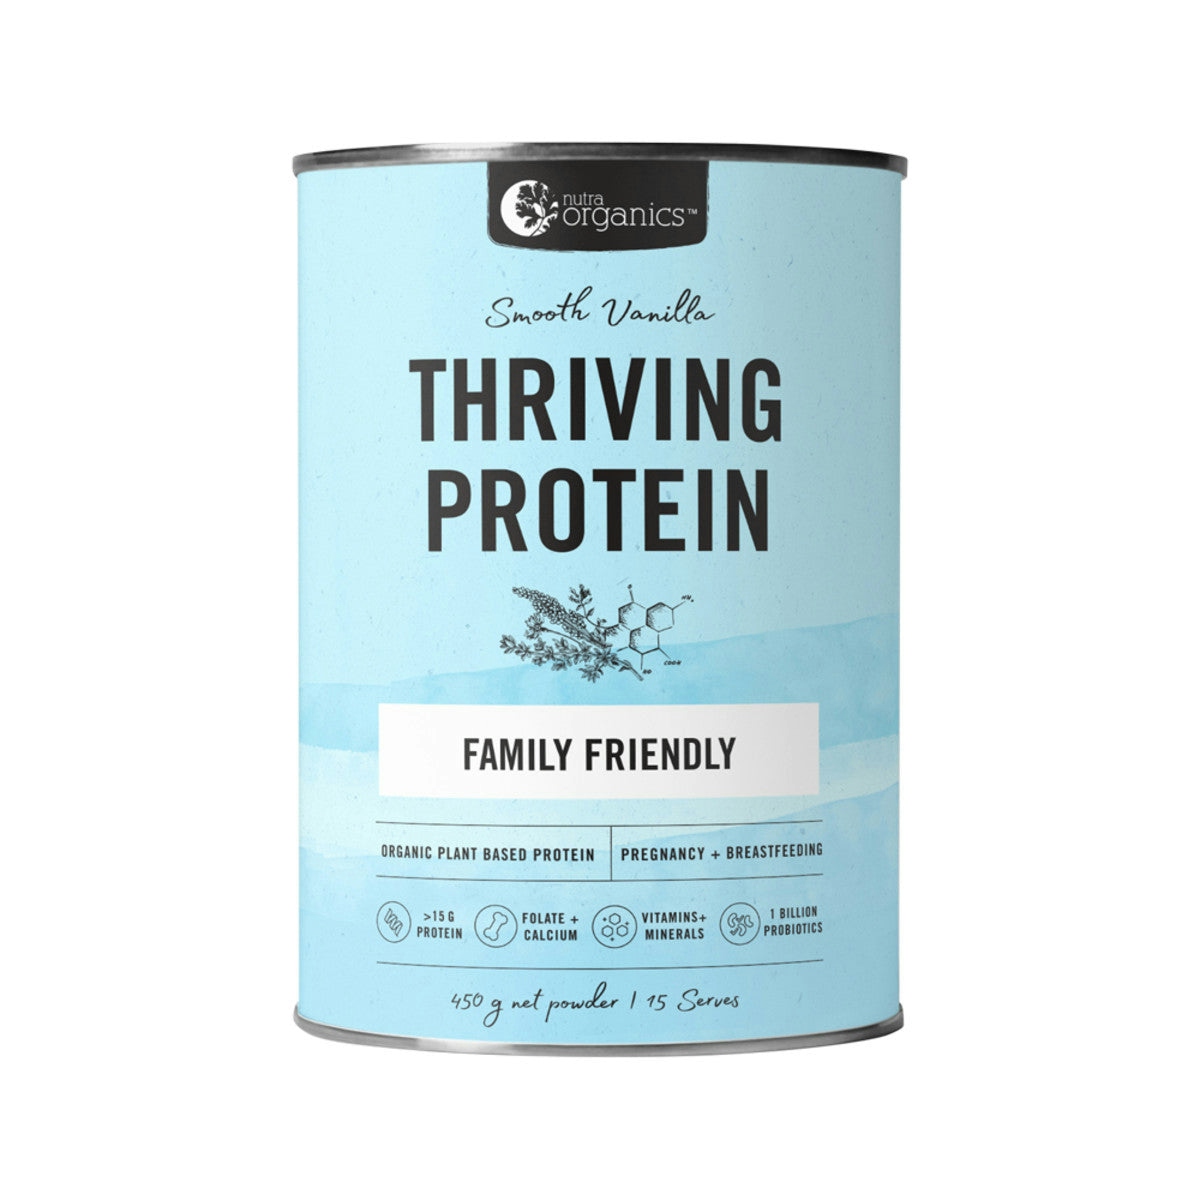 image of Nutra Organics Thriving Protein Smooth Vanilla 450g on white background